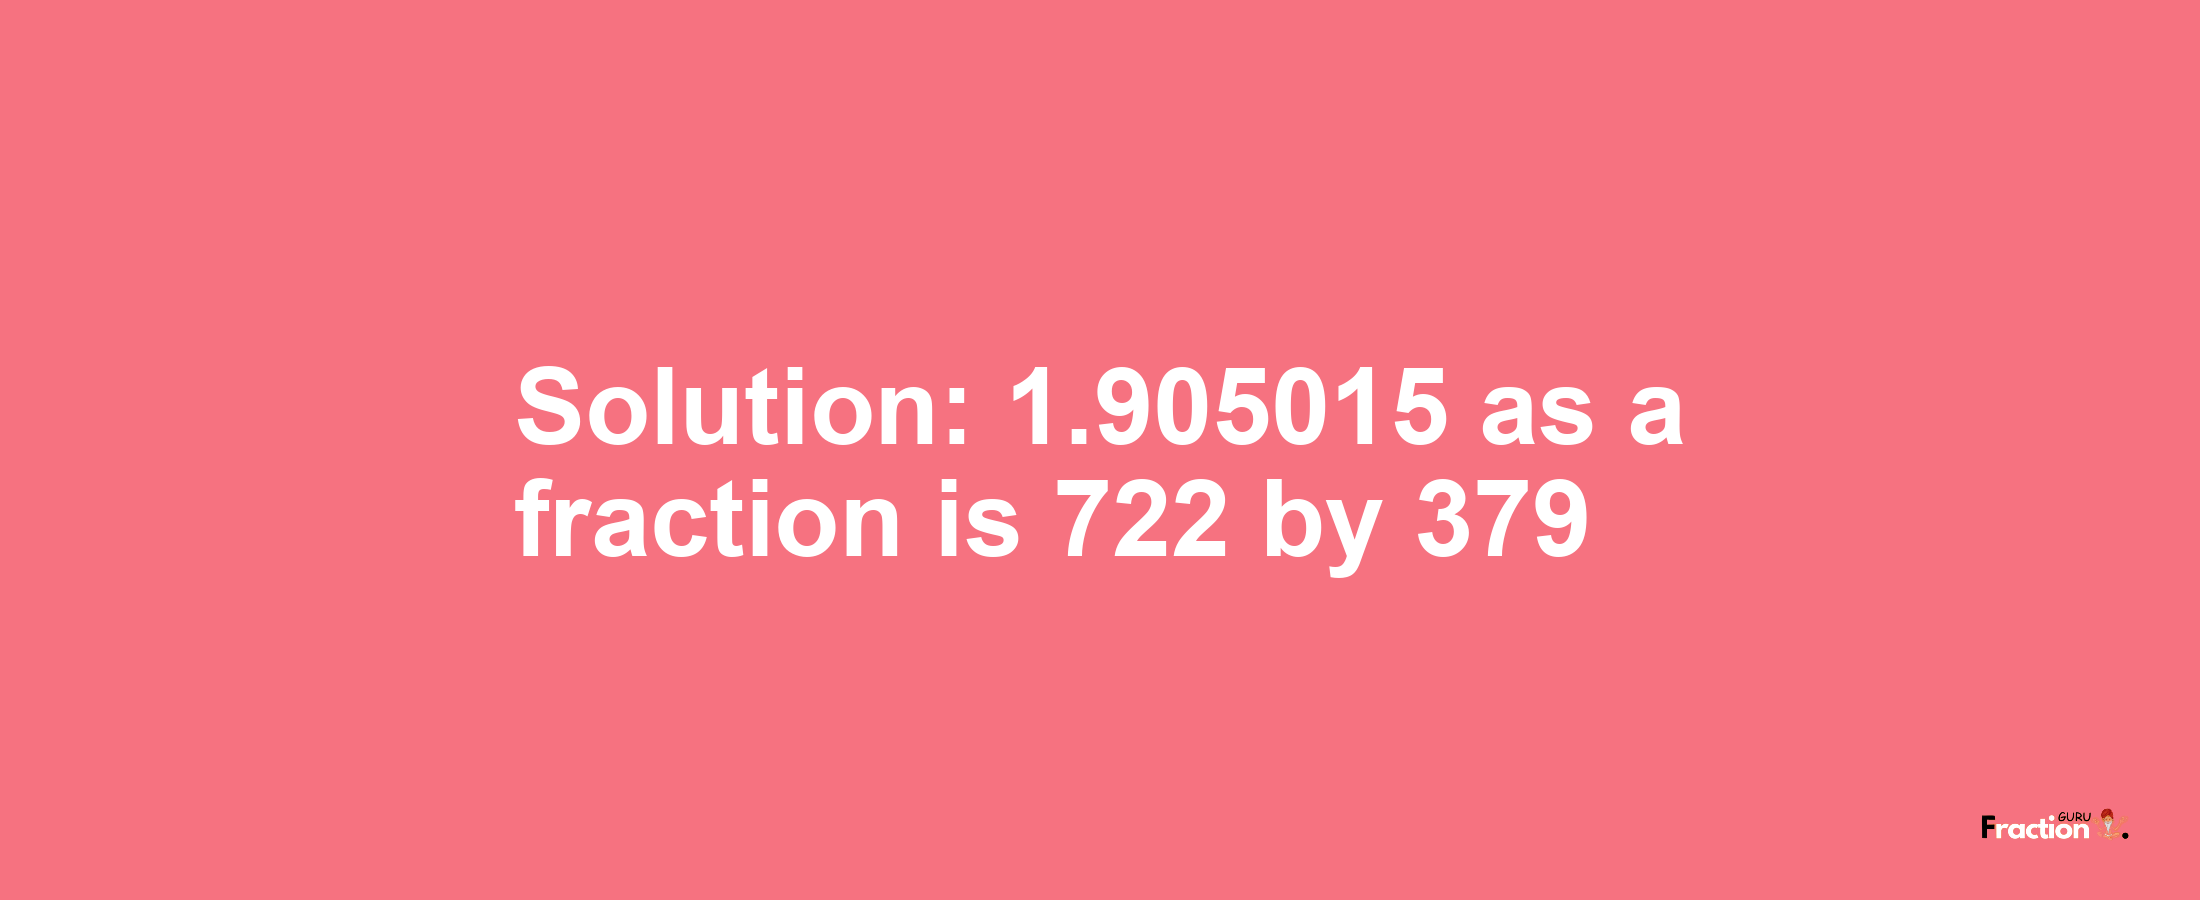 Solution:1.905015 as a fraction is 722/379